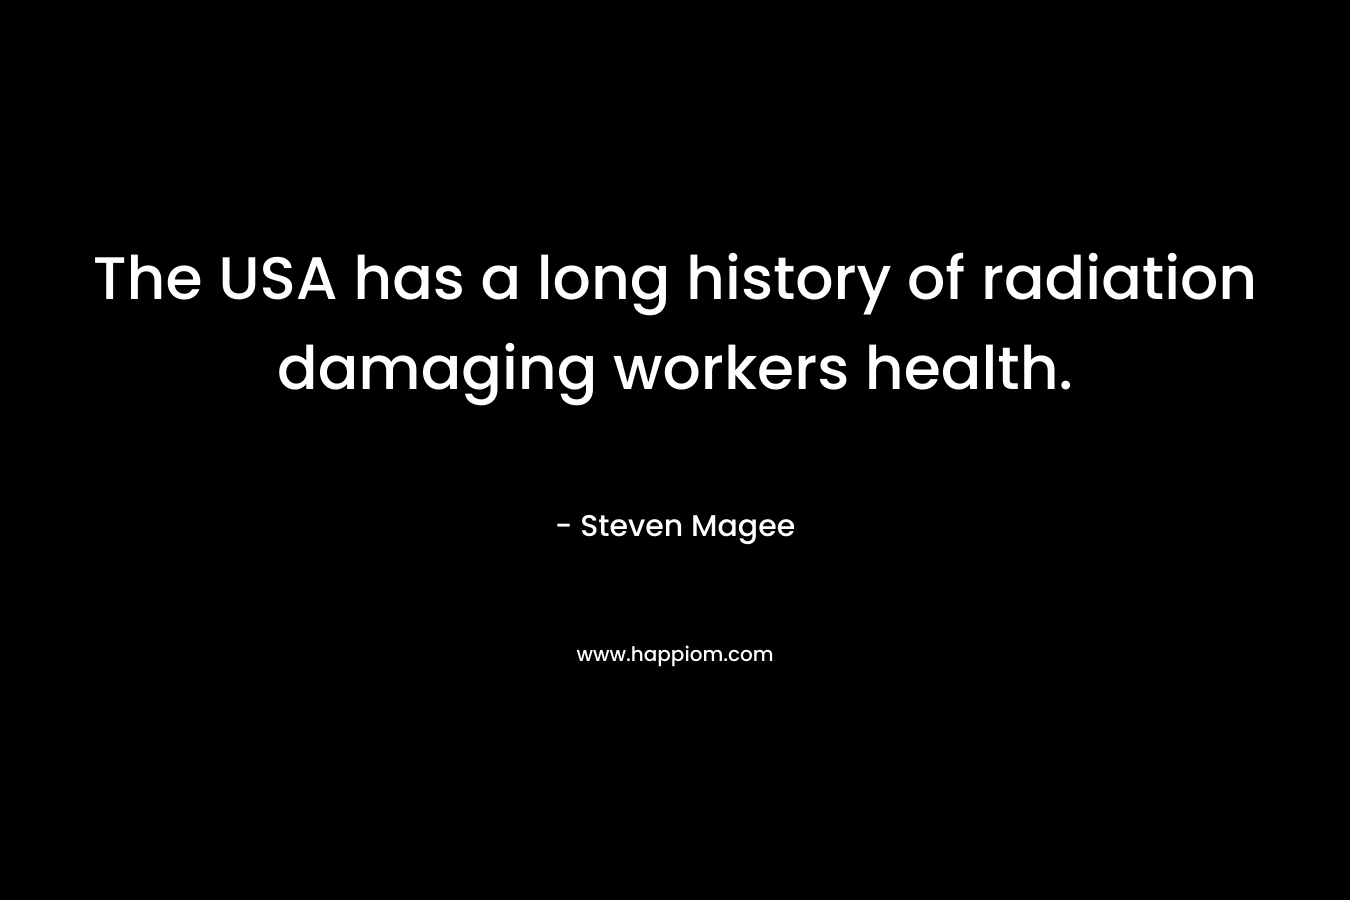 The USA has a long history of radiation damaging workers health.